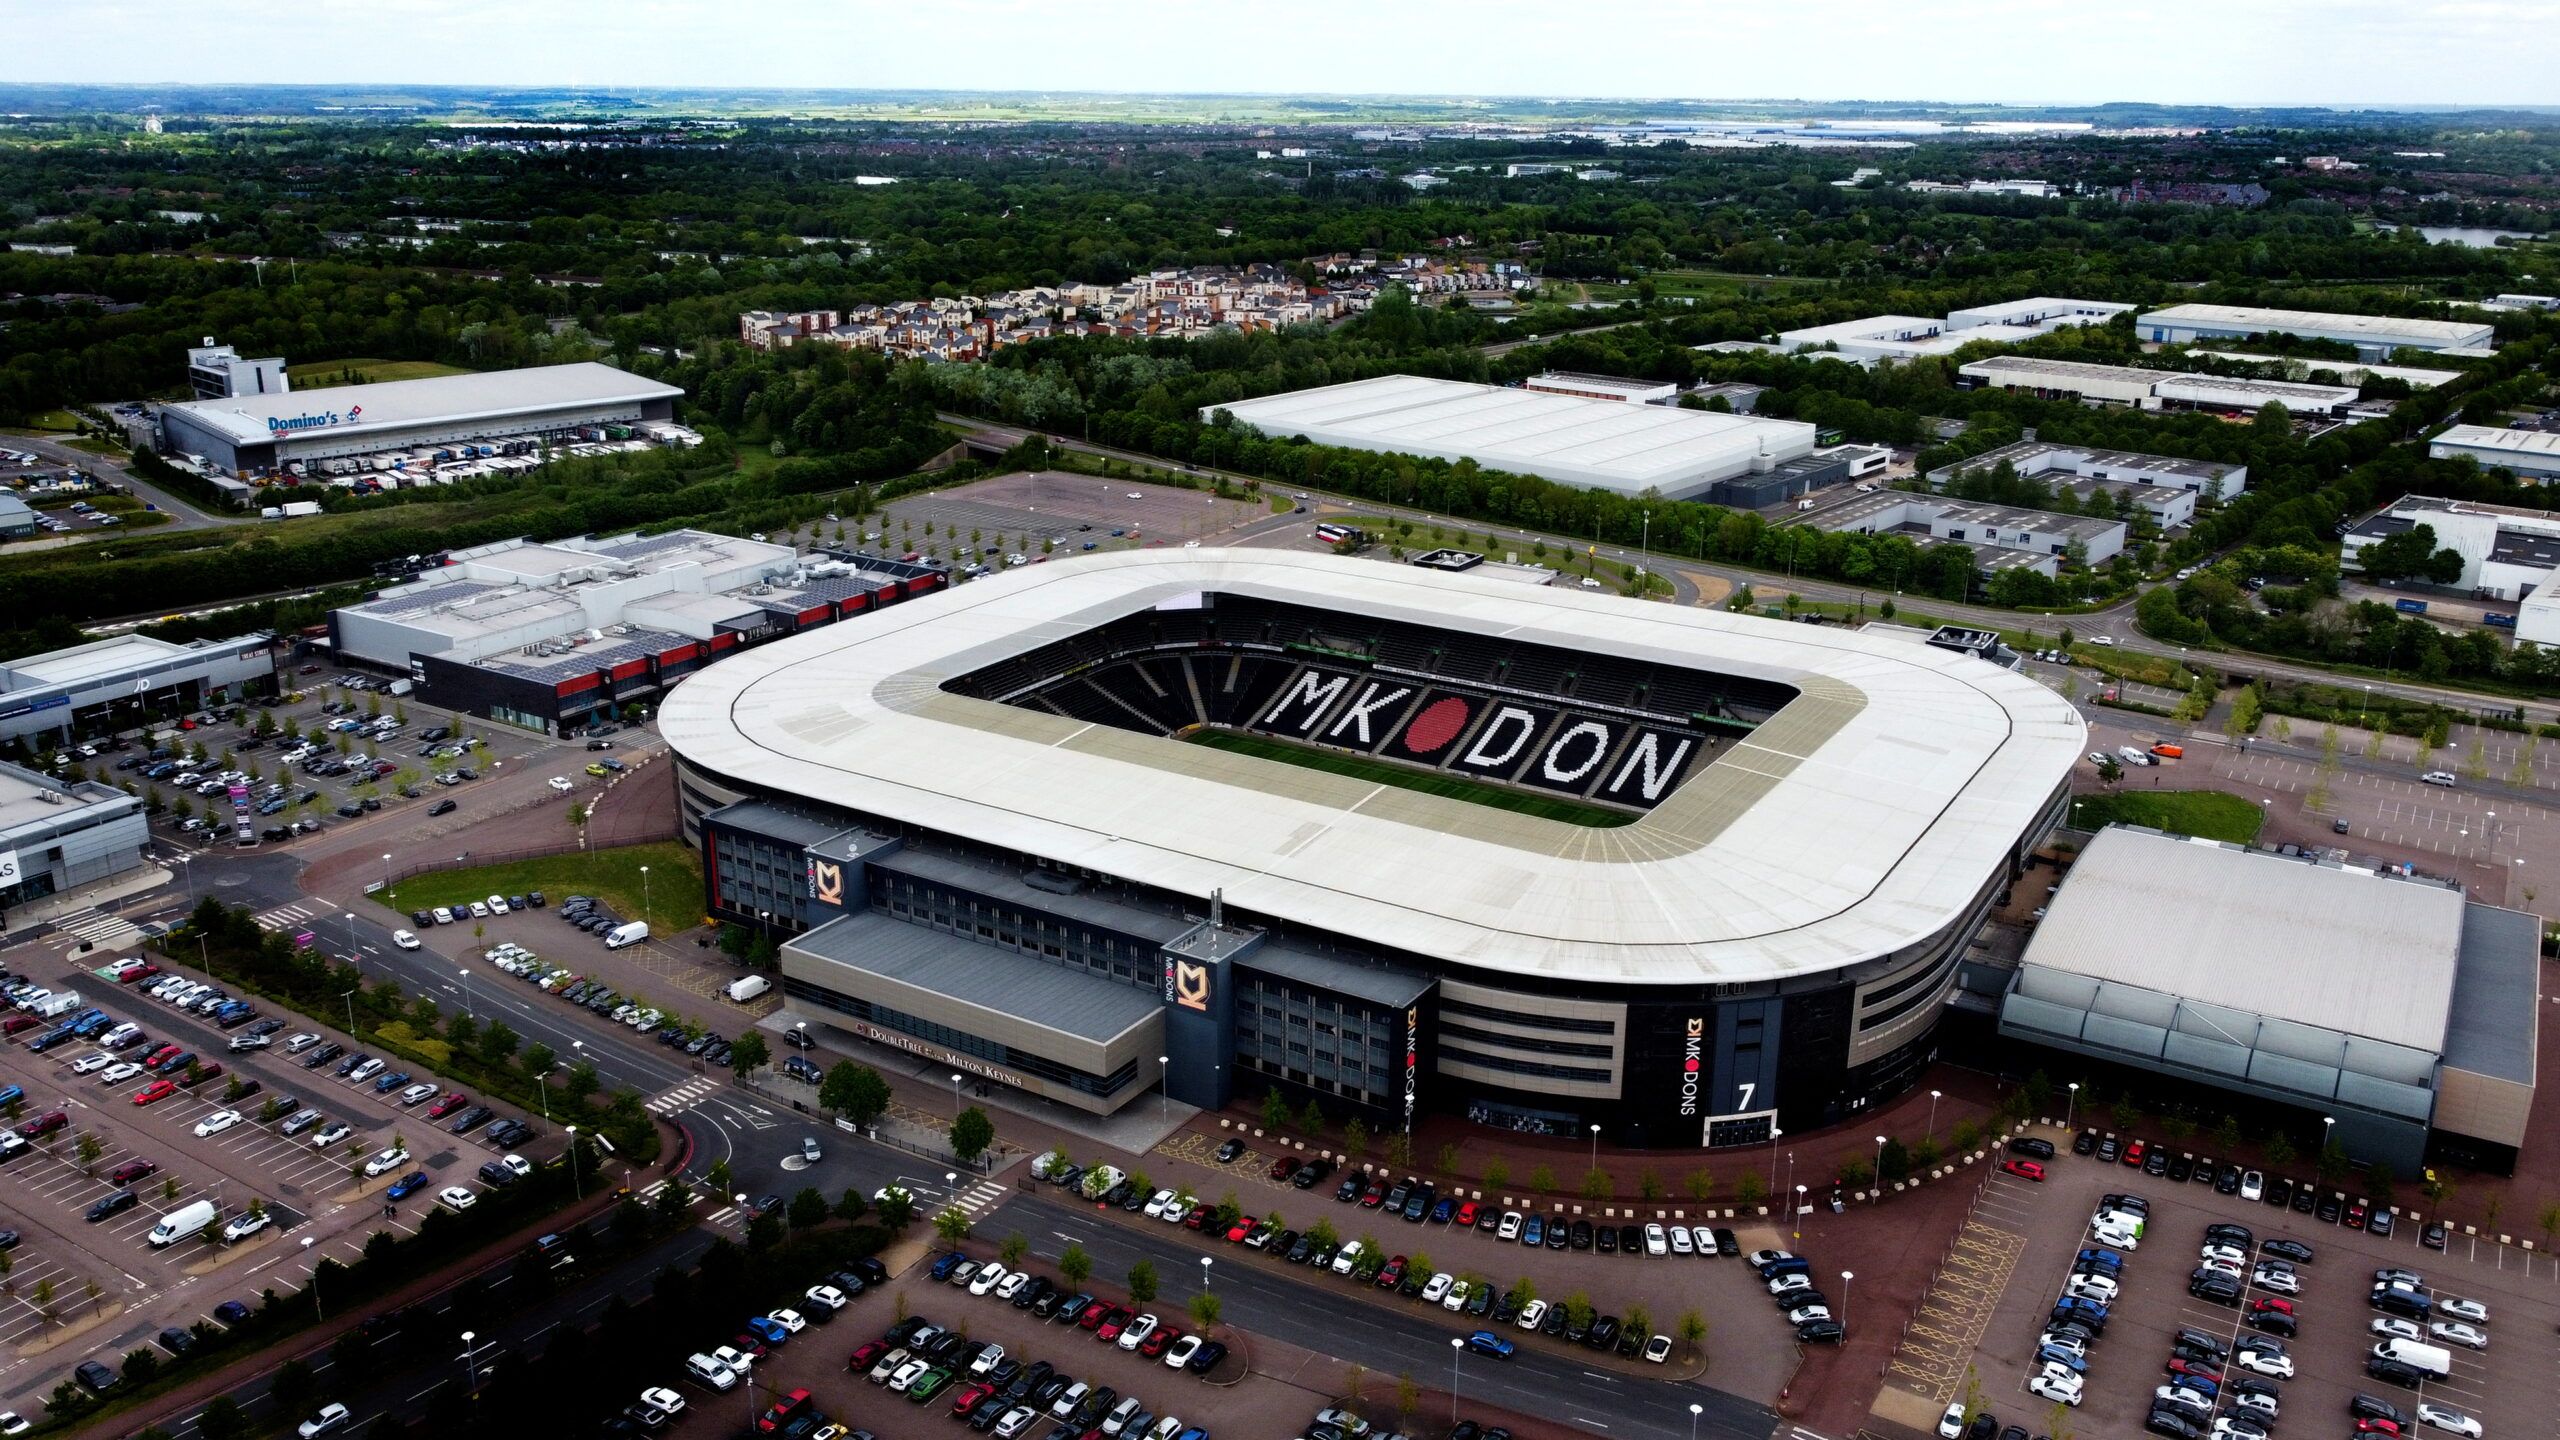 Milton Keynes Dons stadium, Stadium MK, which is one of the stadiums which is being used for UEFA Women's EURO 2022, hosted in England, Britain, June 28, 2022.  Picture taken May 12, 2022. Picture taken with a drone.  Action Images via Reuters/Carl Recine